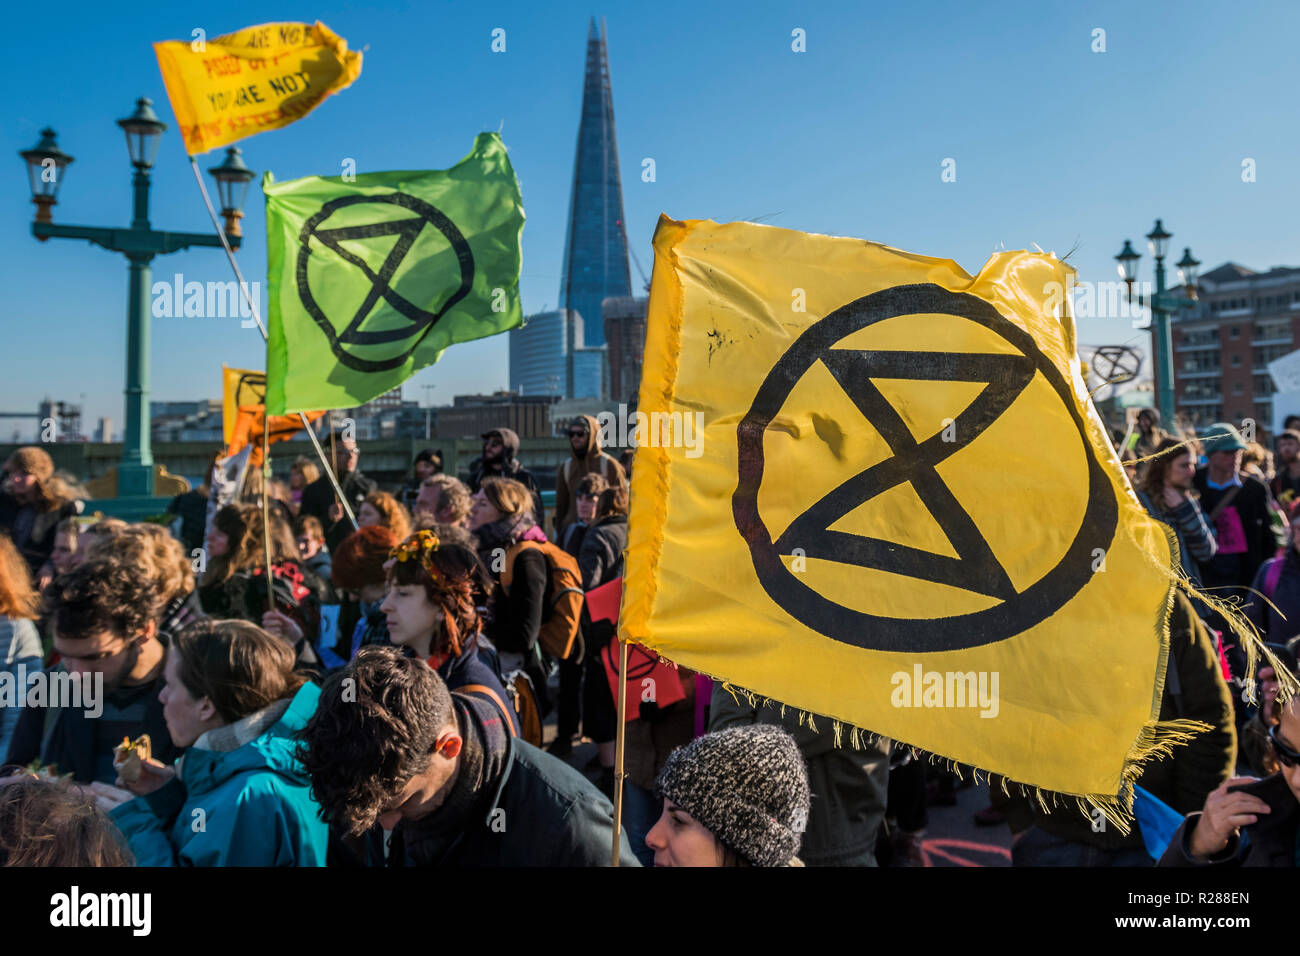 London, UK. 17th November 2018. Southwark Bridge is blocked - Extinction Rebellion Day -  co hosted by Rising Up, 'Rebel Against the British Government For Criminal Inaction in the Face of Climate Change Catastrophe and Ecological Collapse'. A protest that involves blocking 5 bridges: Southwark, Blackfriars, Waterloo, Westminster and Lambeth. Credit: Guy Bell/Alamy Live News Stock Photo